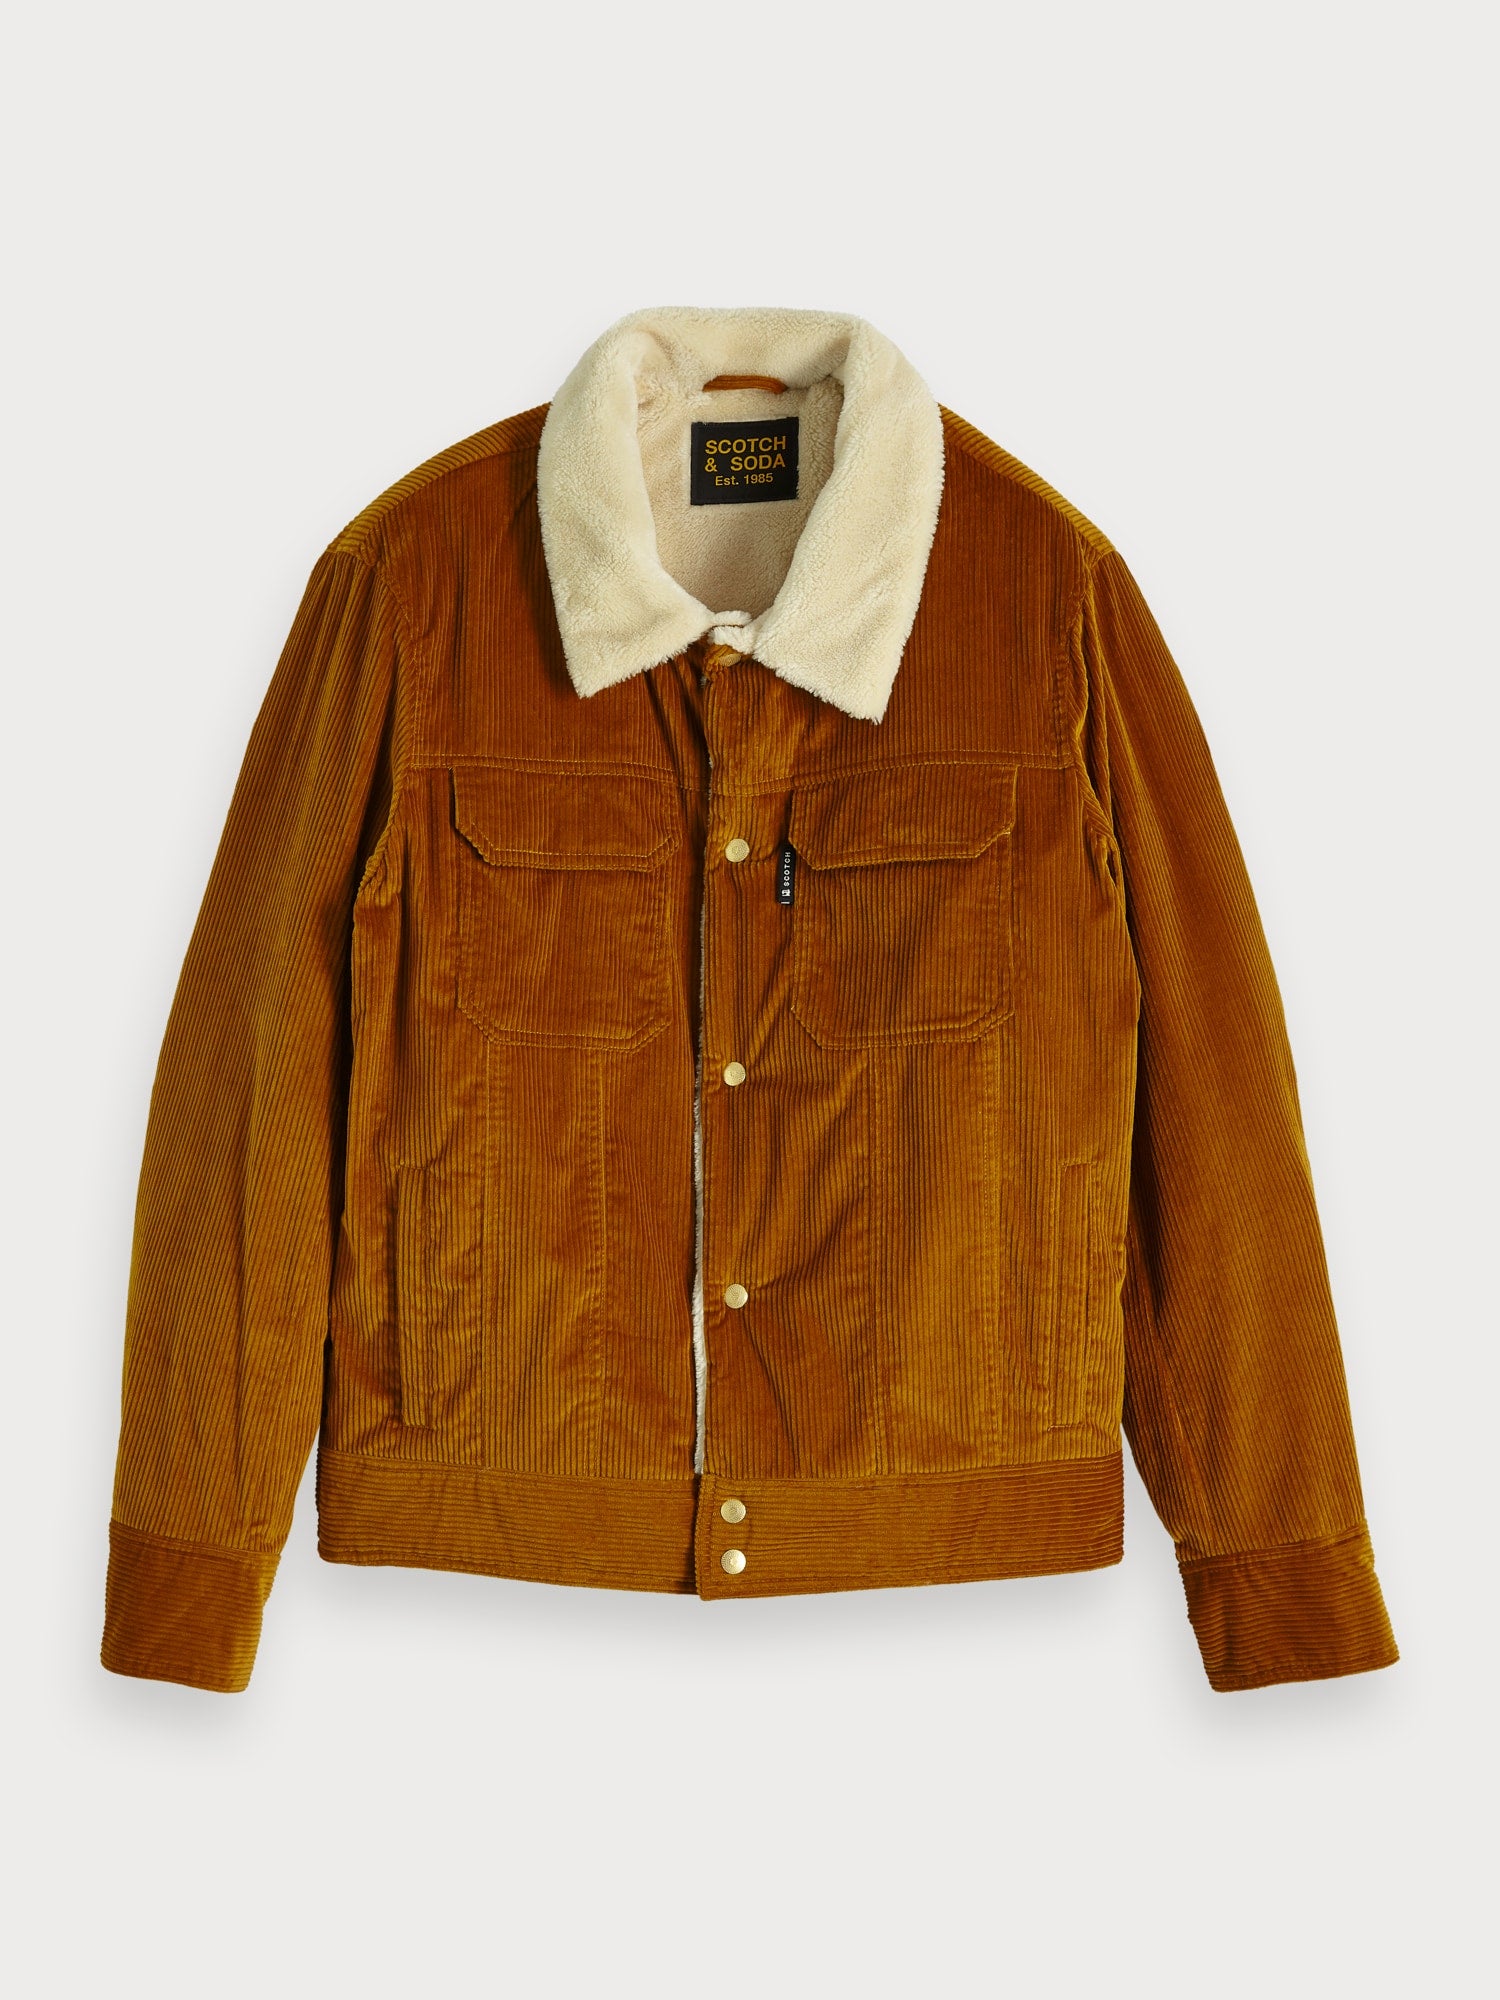 Scotch and Soda | Corduroy Trucker Jacket in Brown | Scotch Select